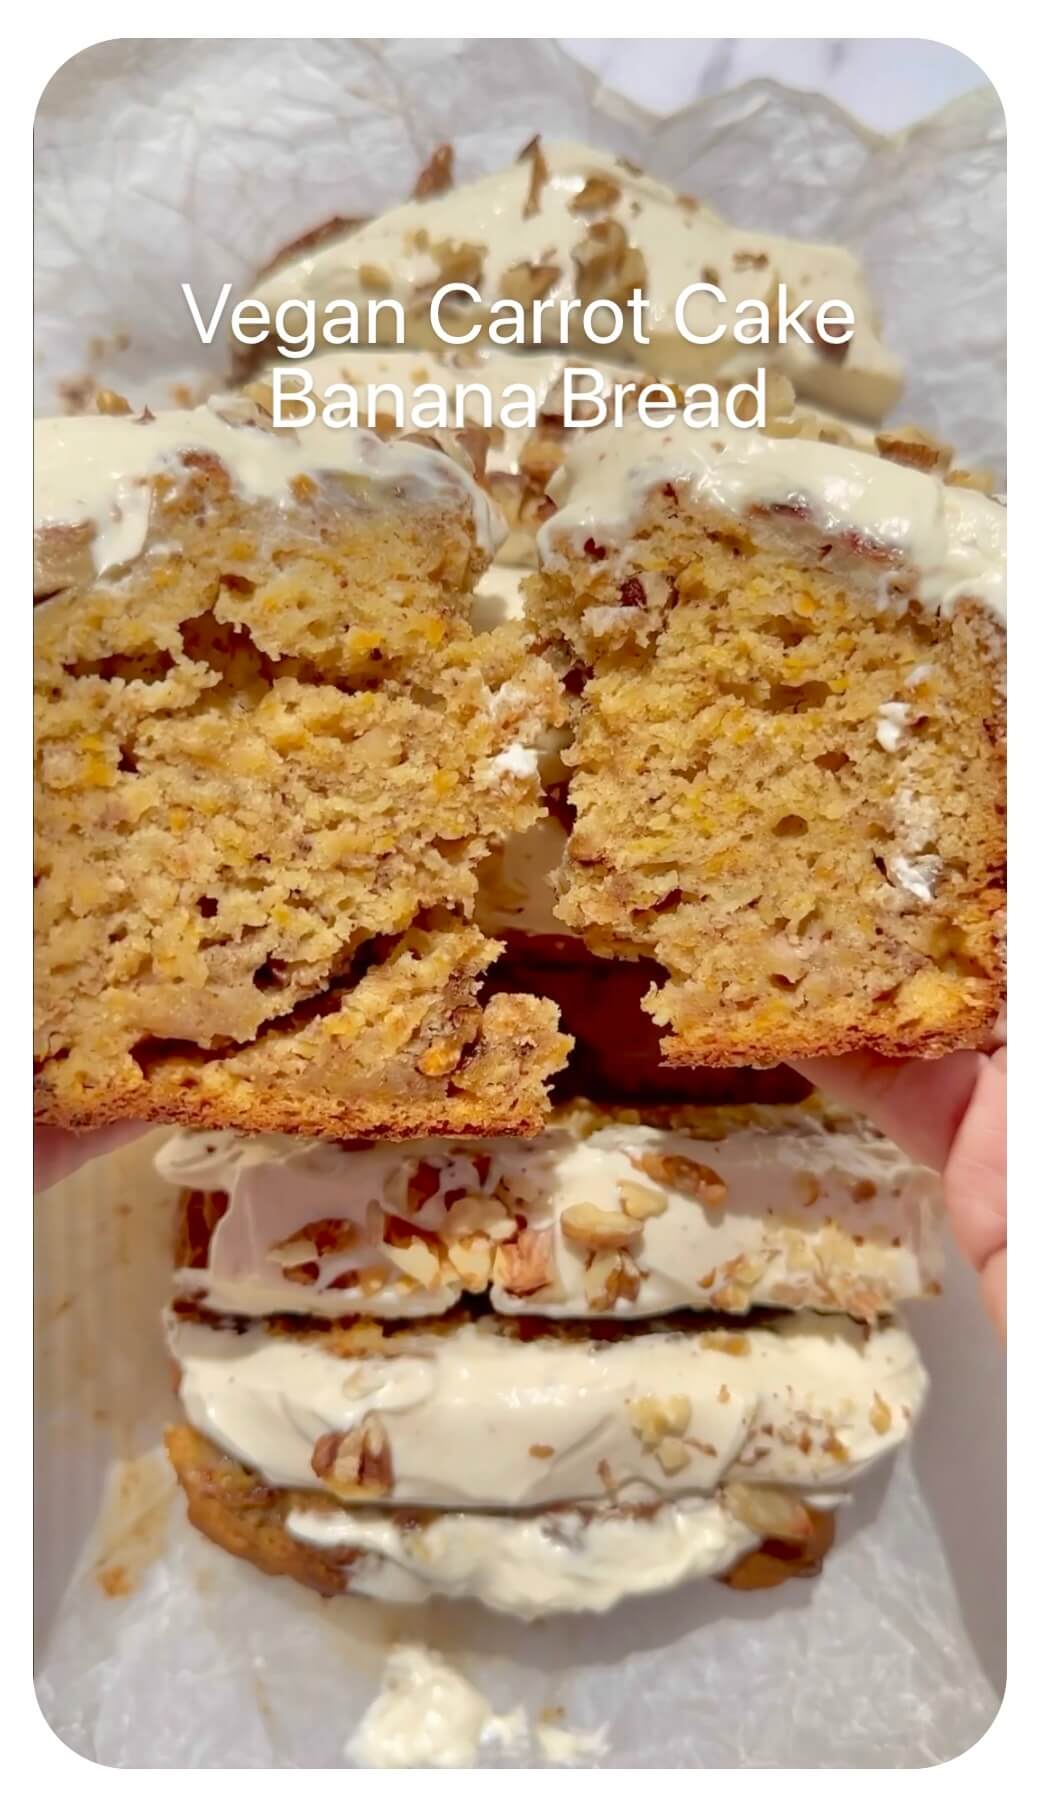 Vegan carrot cake banana bread topped with cream cheese frosting and walnuts, held in hand with a slice torn in half.